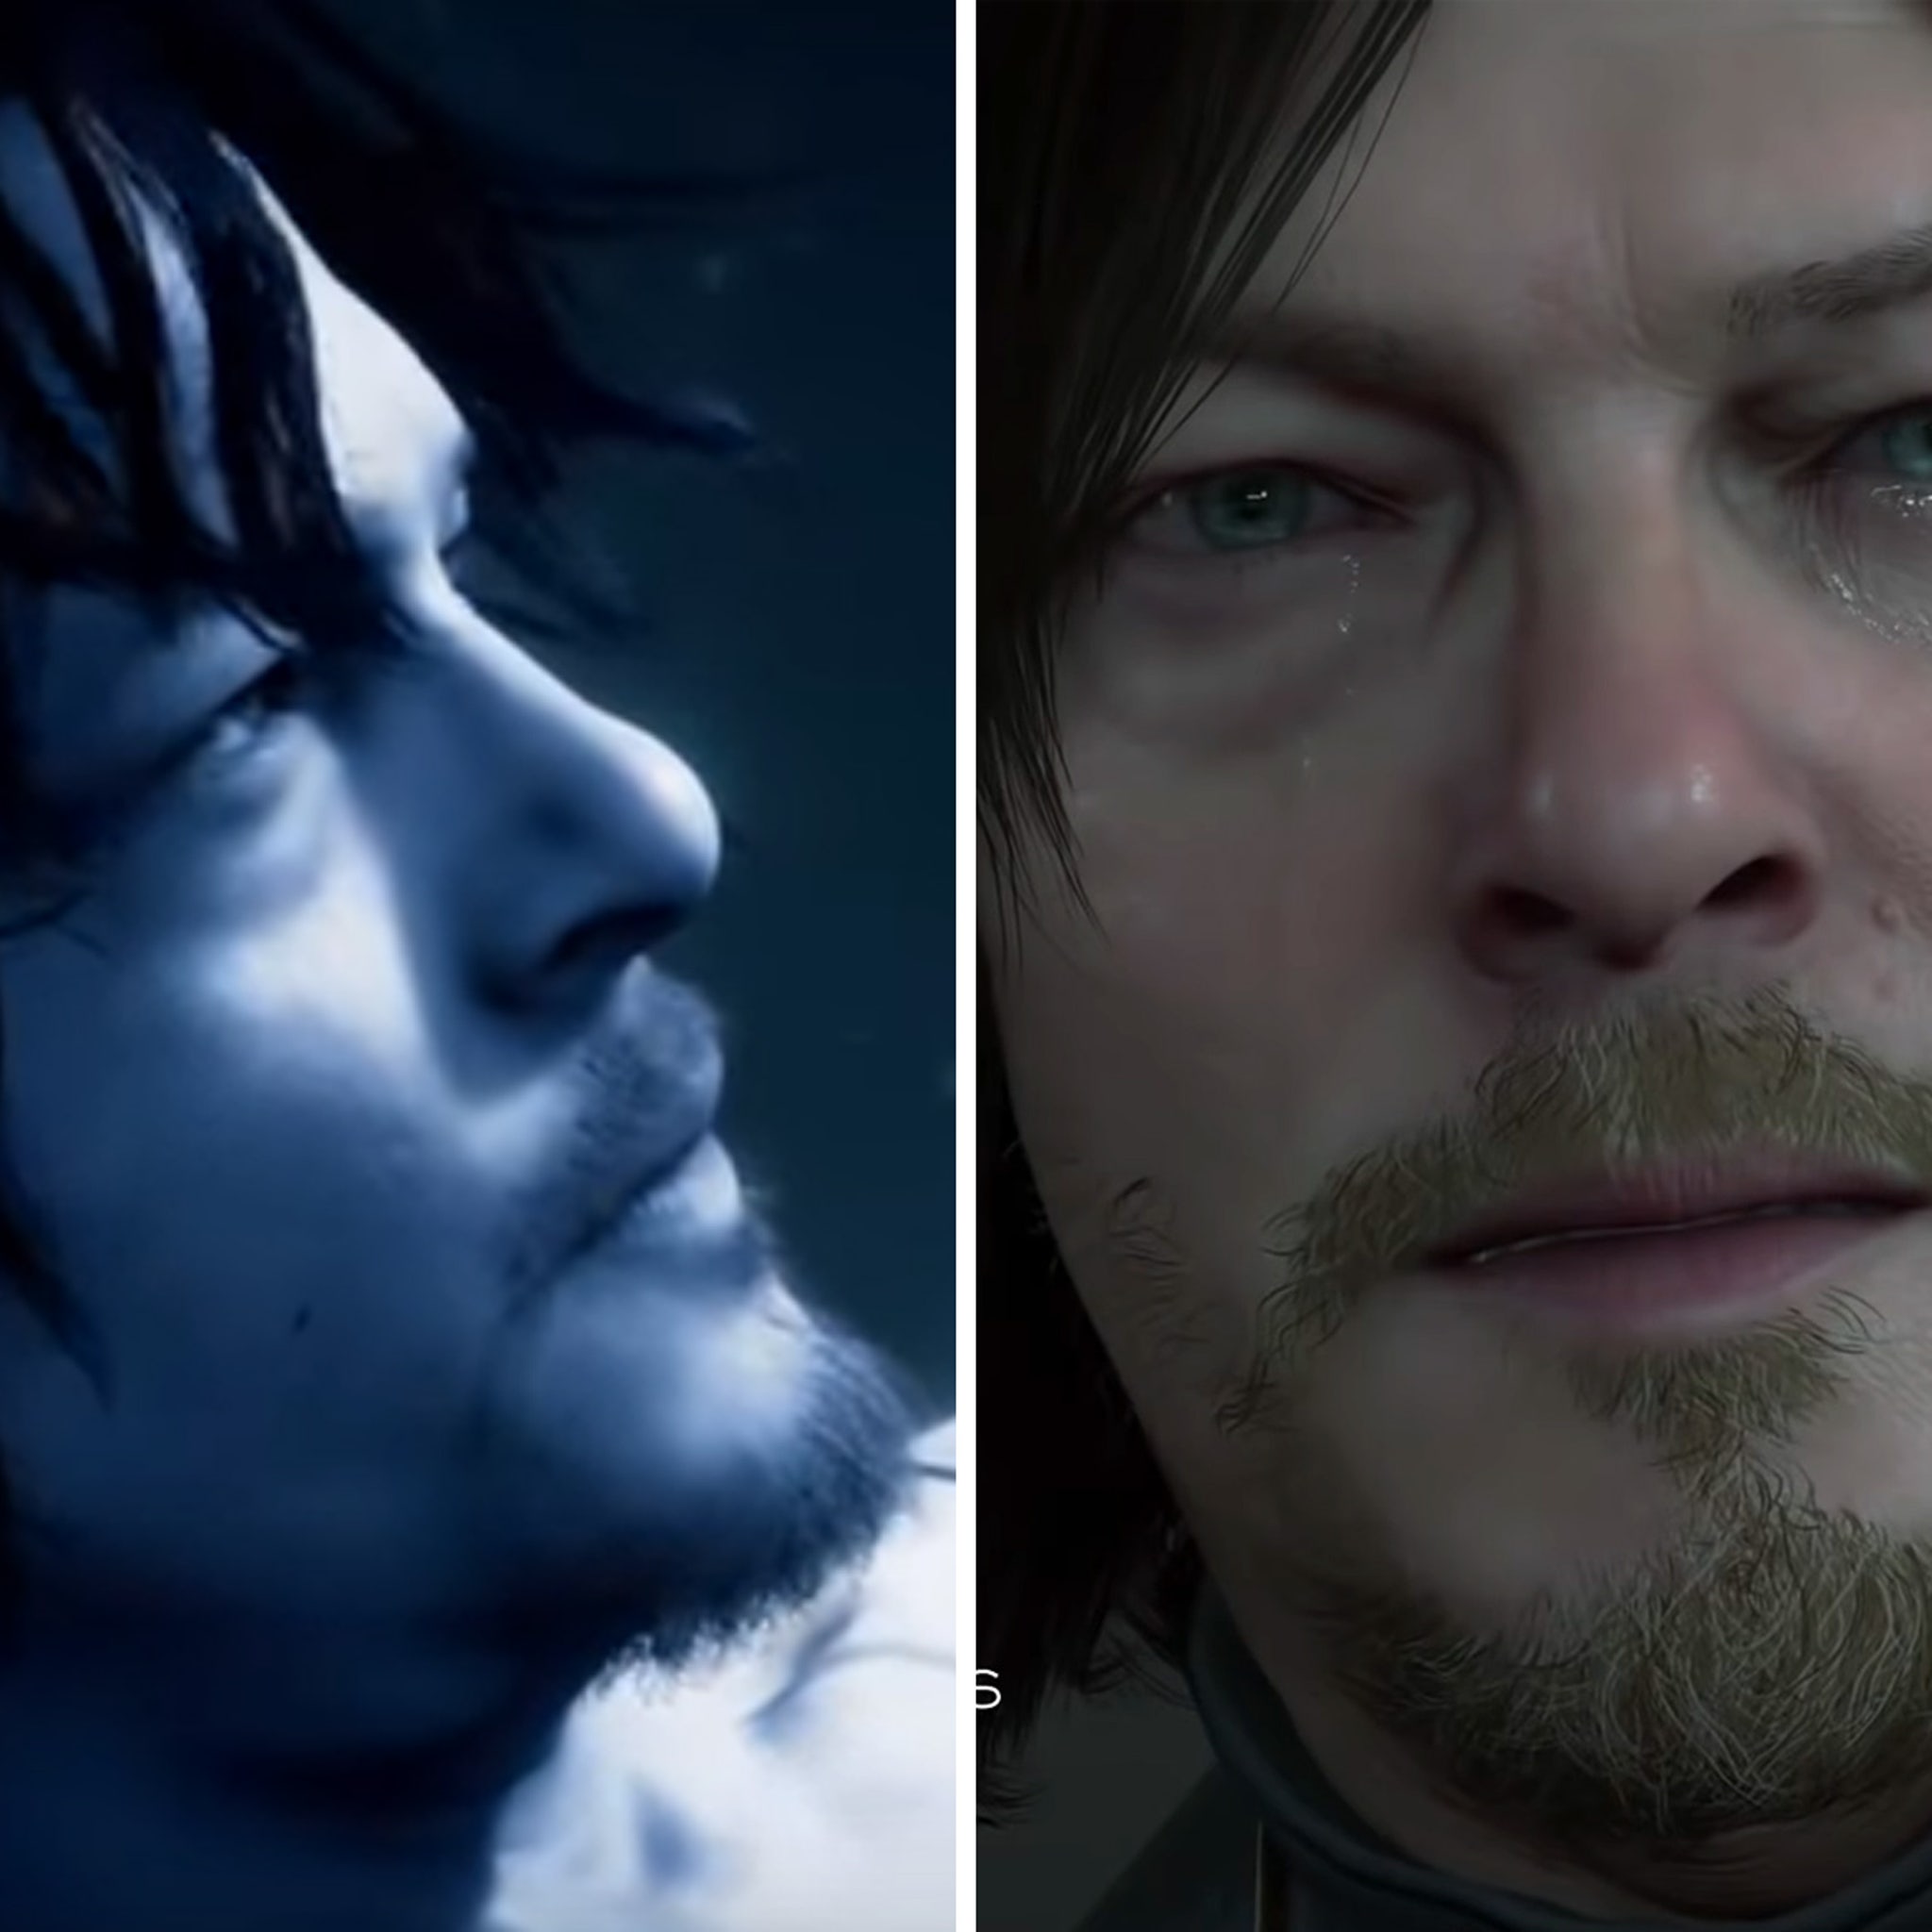 The Walking Dead and Death Stranding actor Norman Reedus will